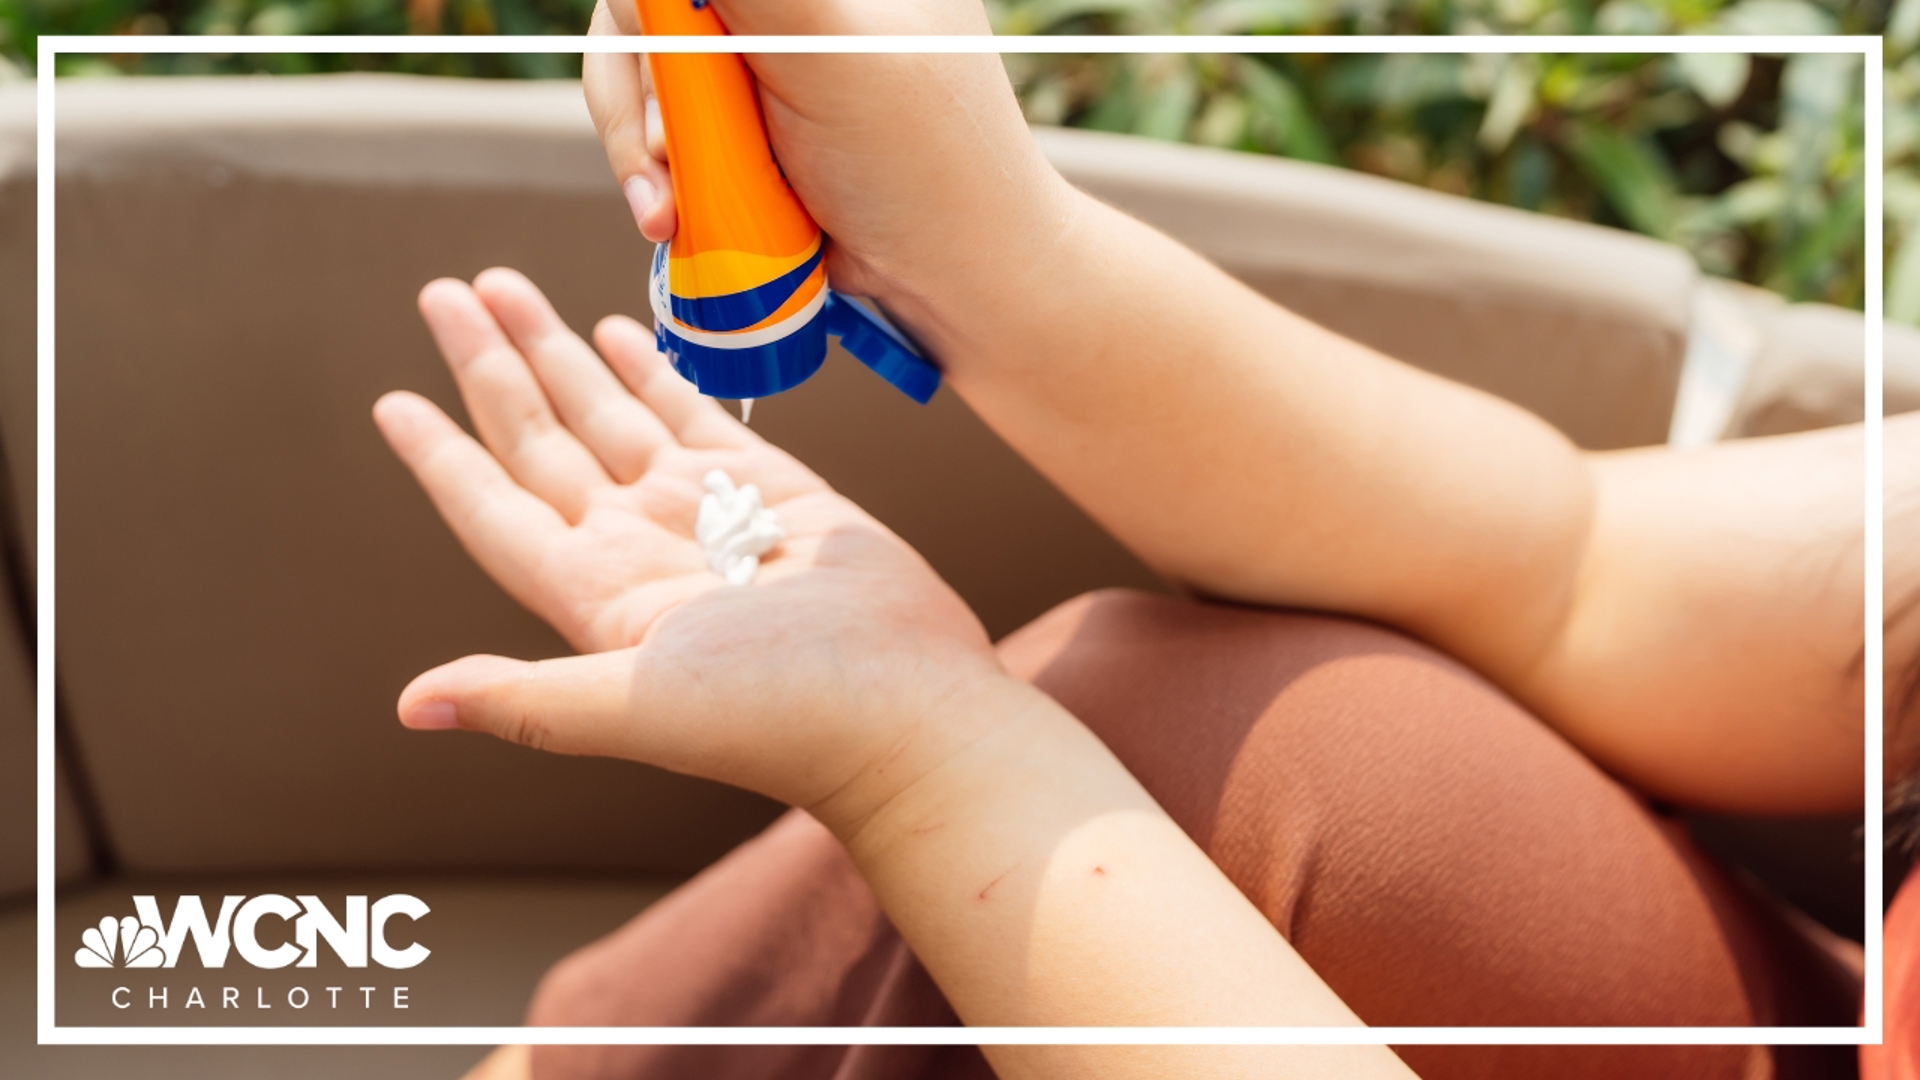 Here are some myths about sunscreen to disregard as the summer heat continues.